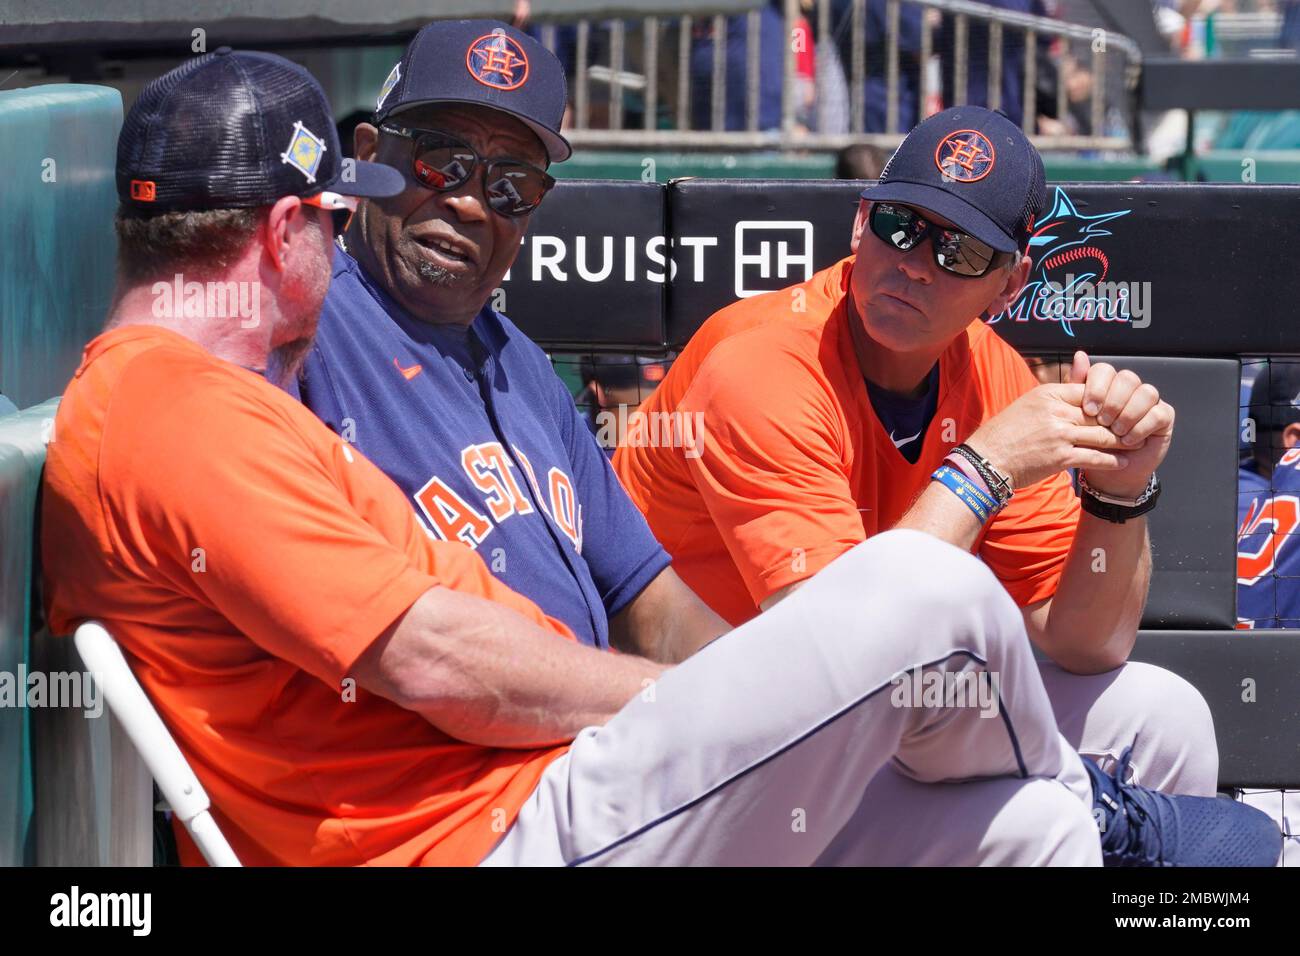 Houston Astros manager Dusty Baker Jr., center, talks with Jeff Bagwell,  left, Community Outreach Executive, and Craig Biggio, right, Special  Assistant to the GM, right, before a spring training baseball game against